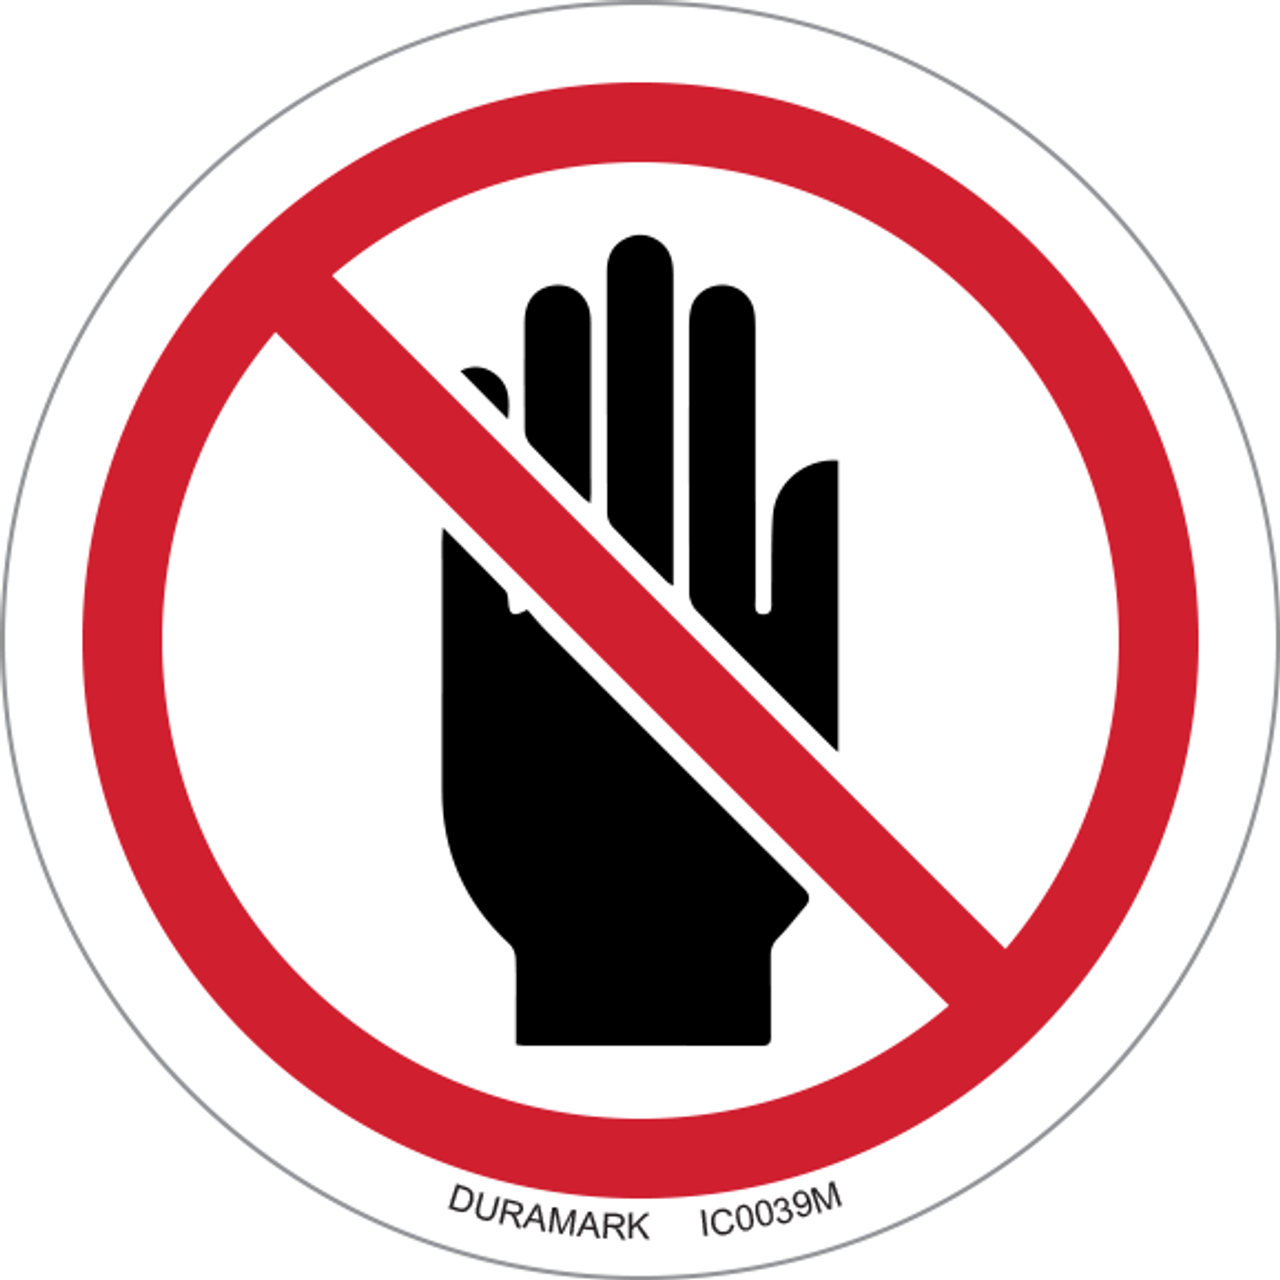 Do not touch pinch point symbol and text safety Sign. - Industrial